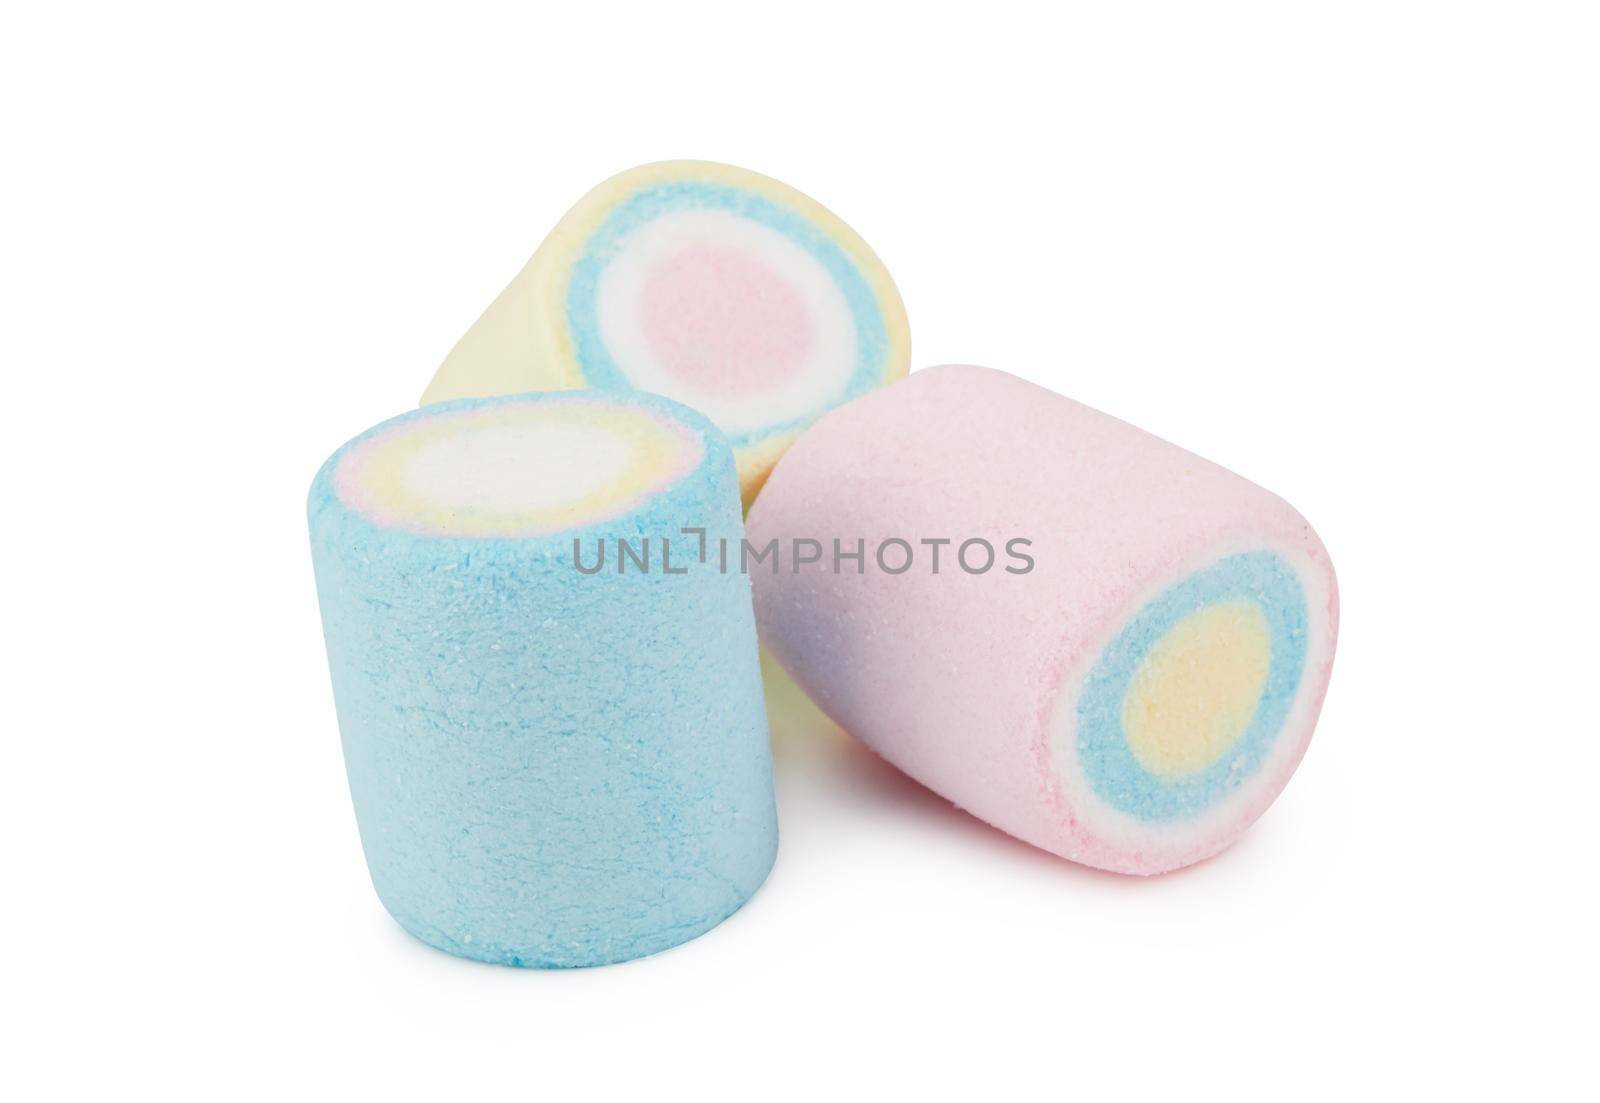 Marshmallows of different colors isolated on white background